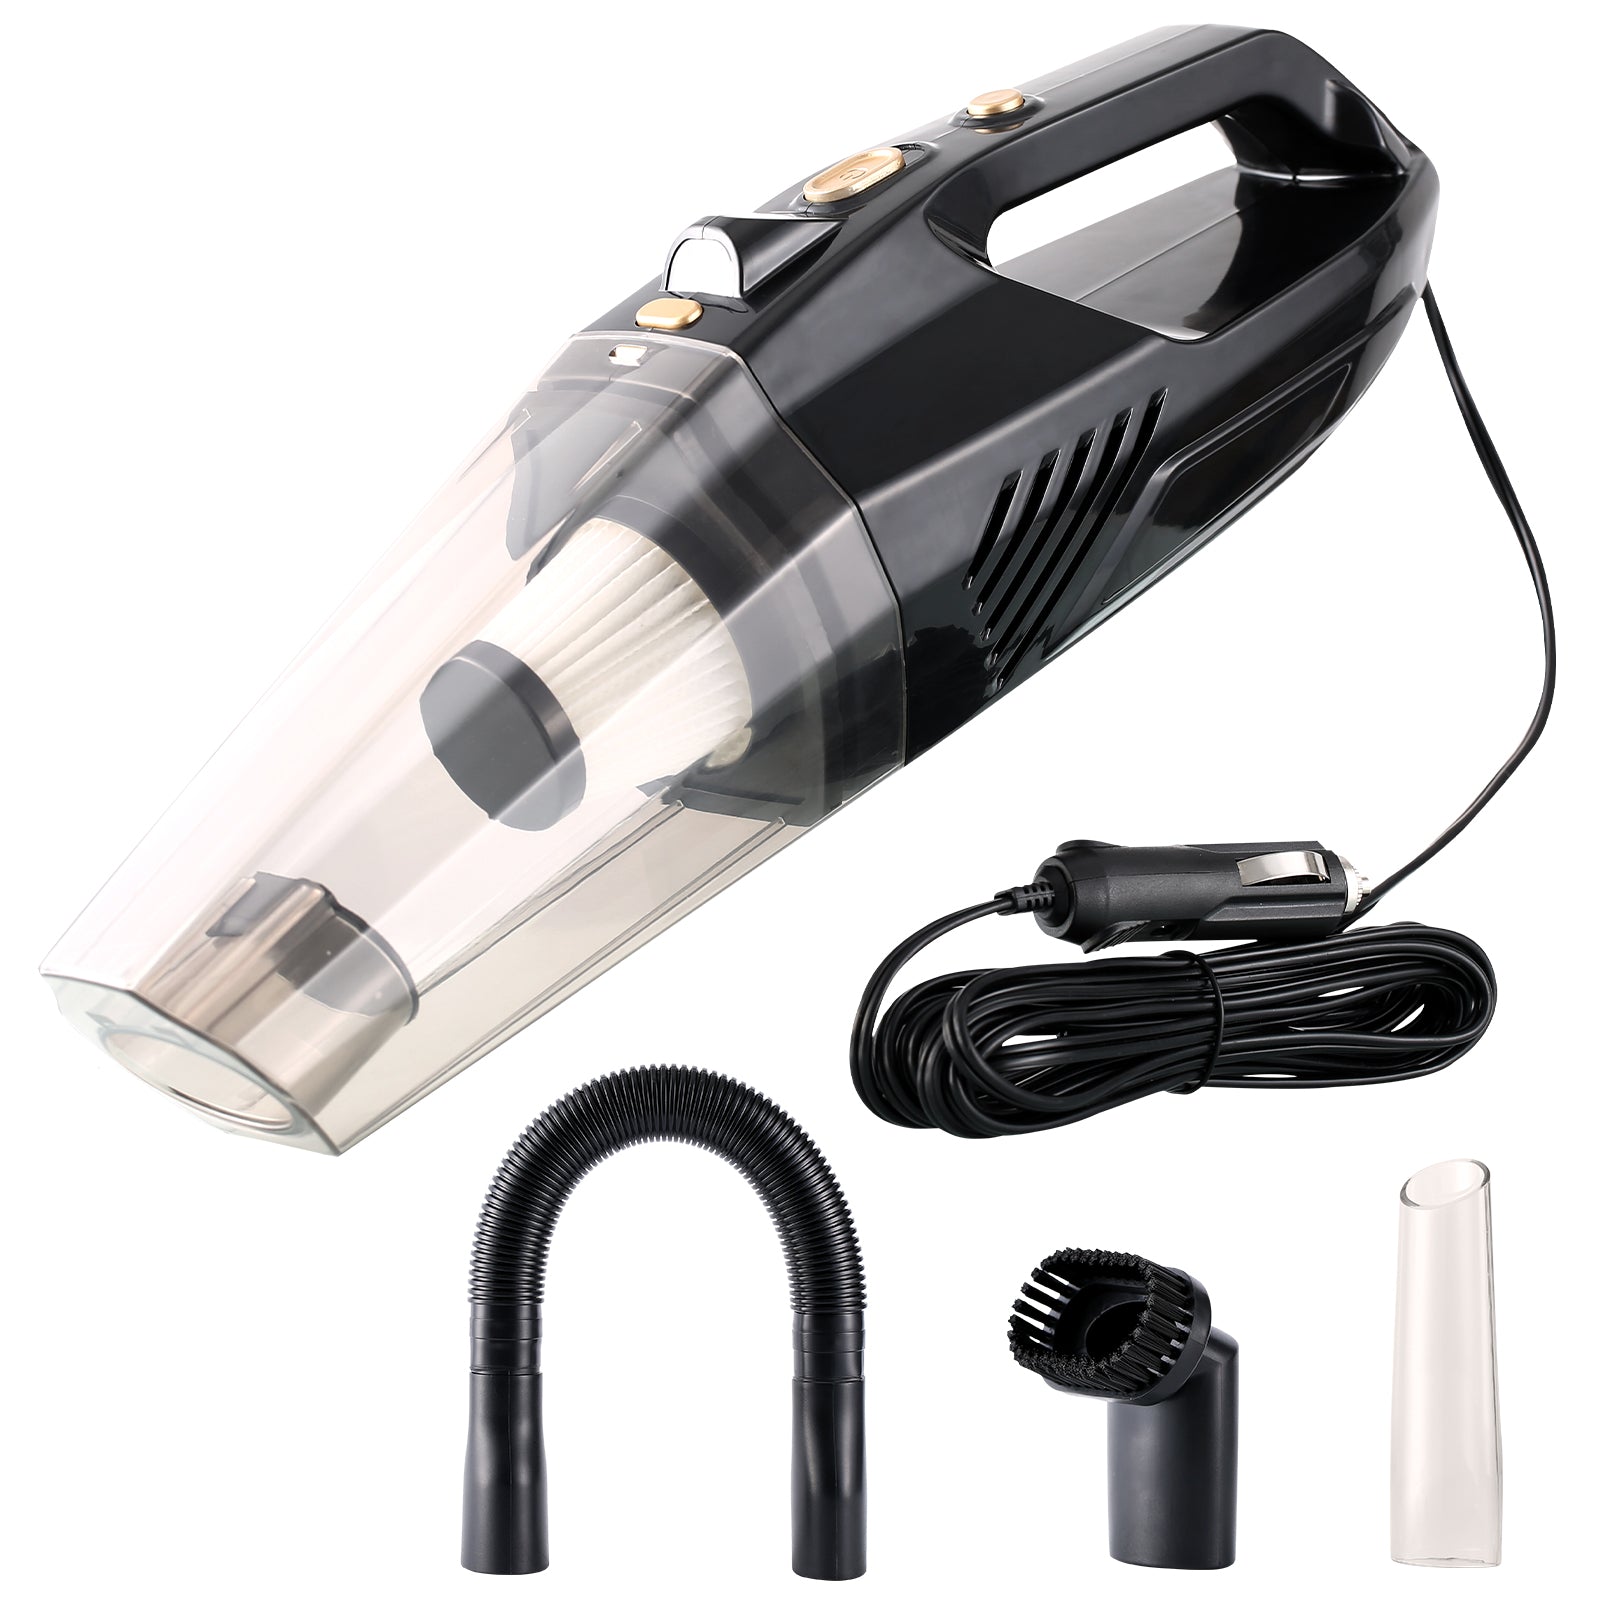 Portable Car Vacuum Cleaner, Handheld Powerful Vacuum Cleaner with 8000Pa  Strong Suction, Mini Rechargeable Car Vacuum Cleaner For Car Cordless Home  Appliance Car Products Mini Cleaner 